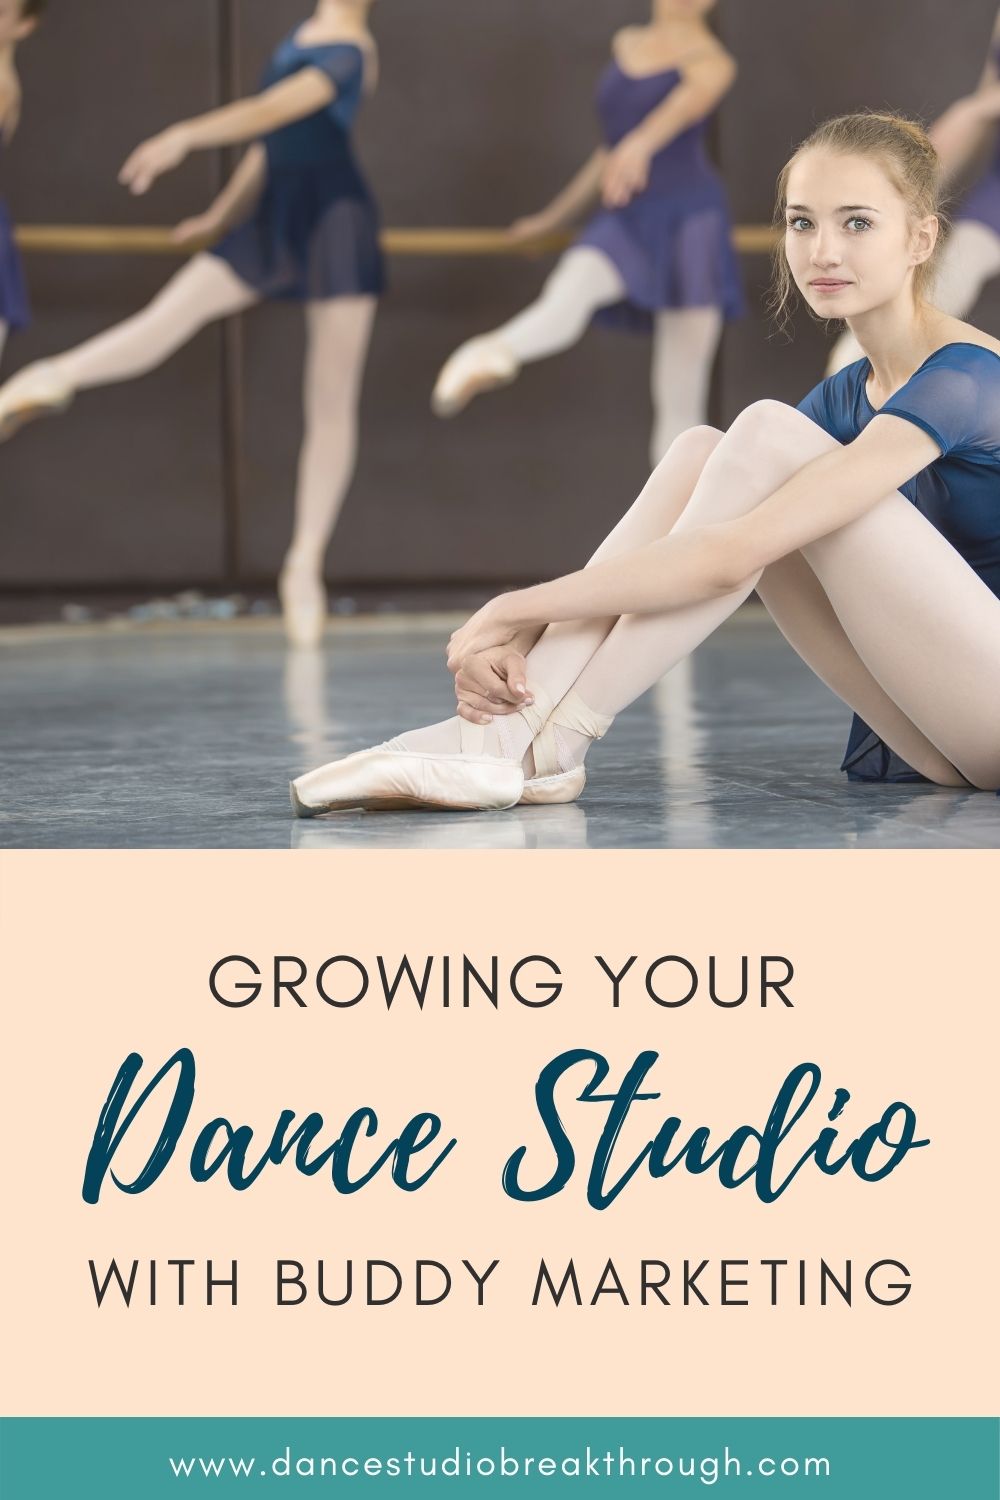 Bring new dancers into your studio with Buddy Marketing